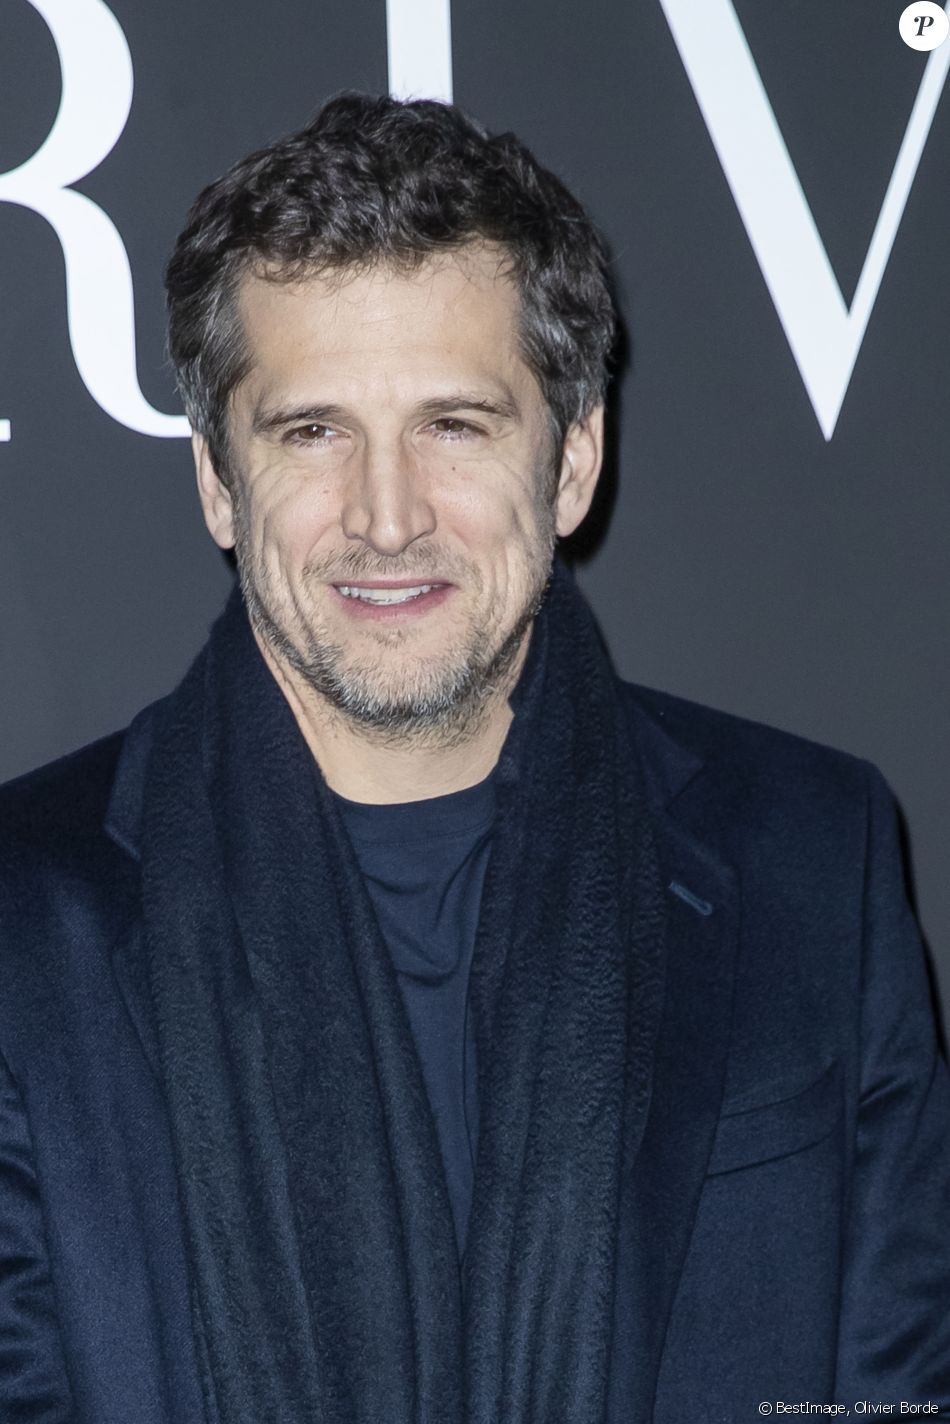 https://static1.purepeople.com/articles/8/39/00/08/@/5608124-guillaume-canet-people-au-photocall-du-950x0-2.jpg